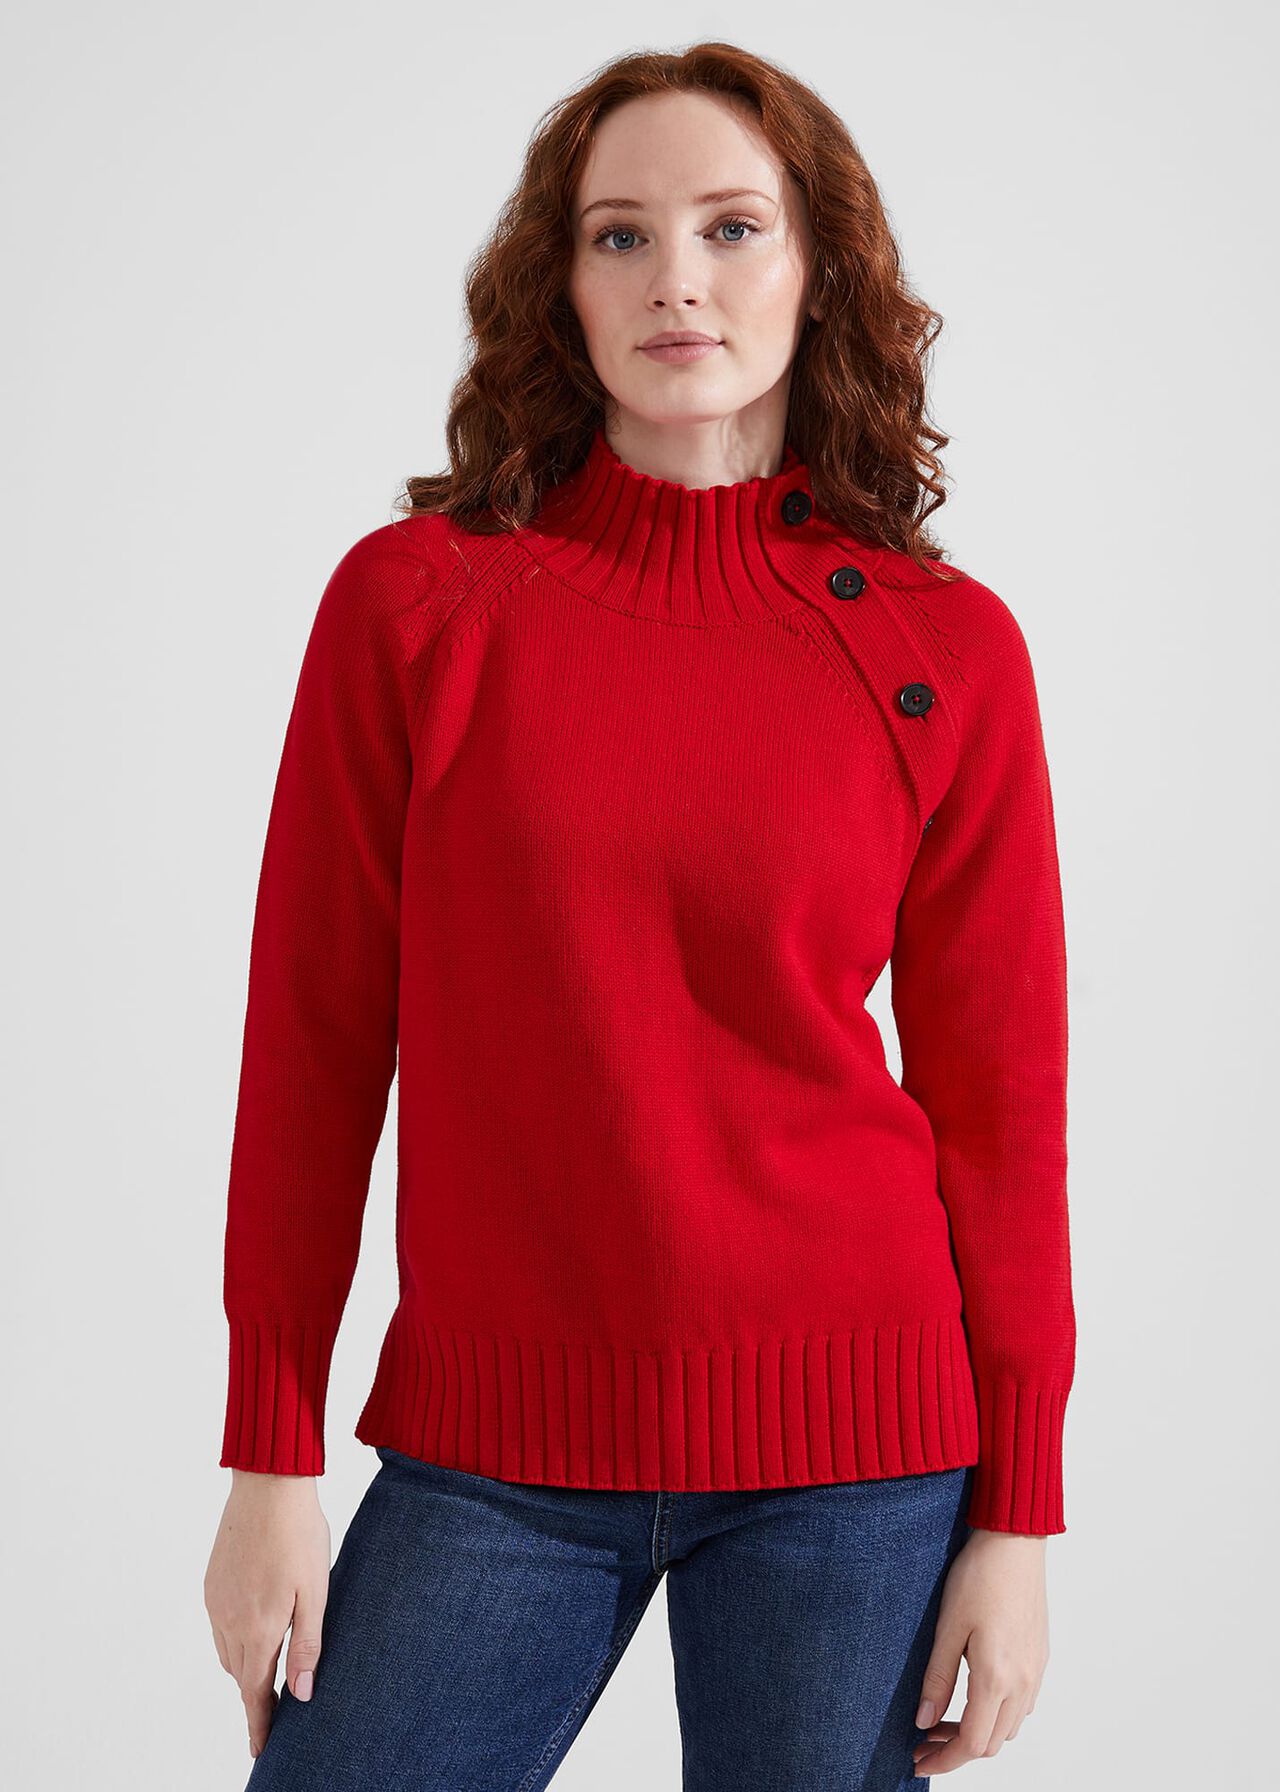 Chrissy Cotton Sweater, Hobbs Red, hi-res